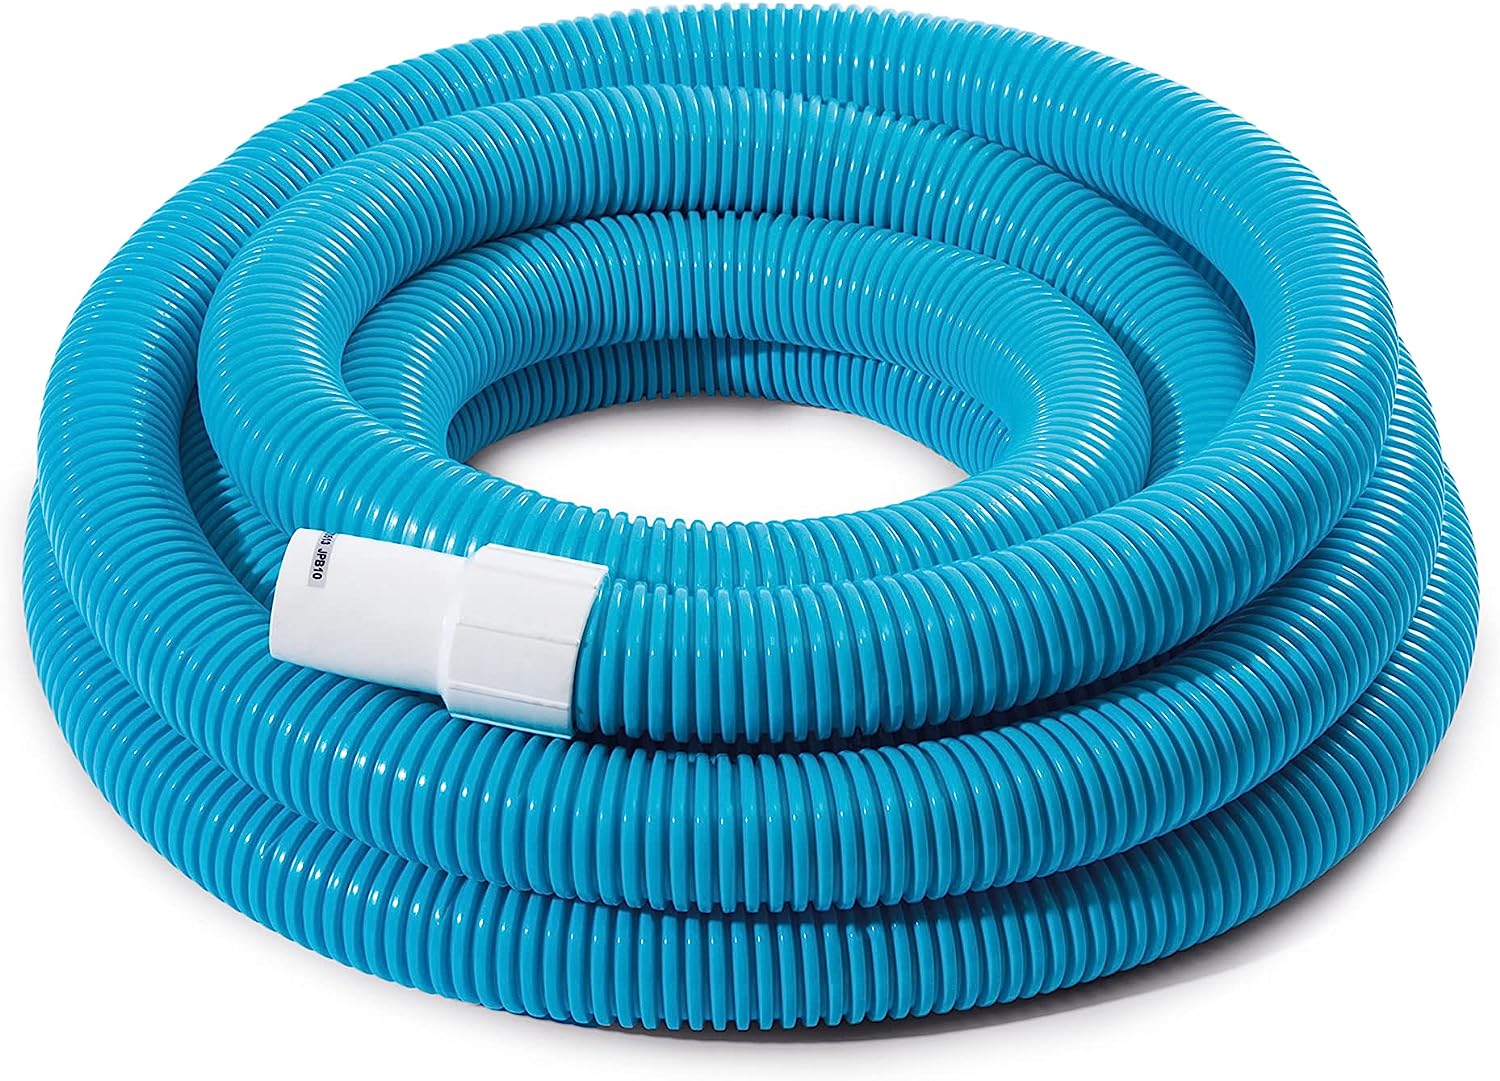 Find Out What Makes a Great Pool Hose for Your Pool